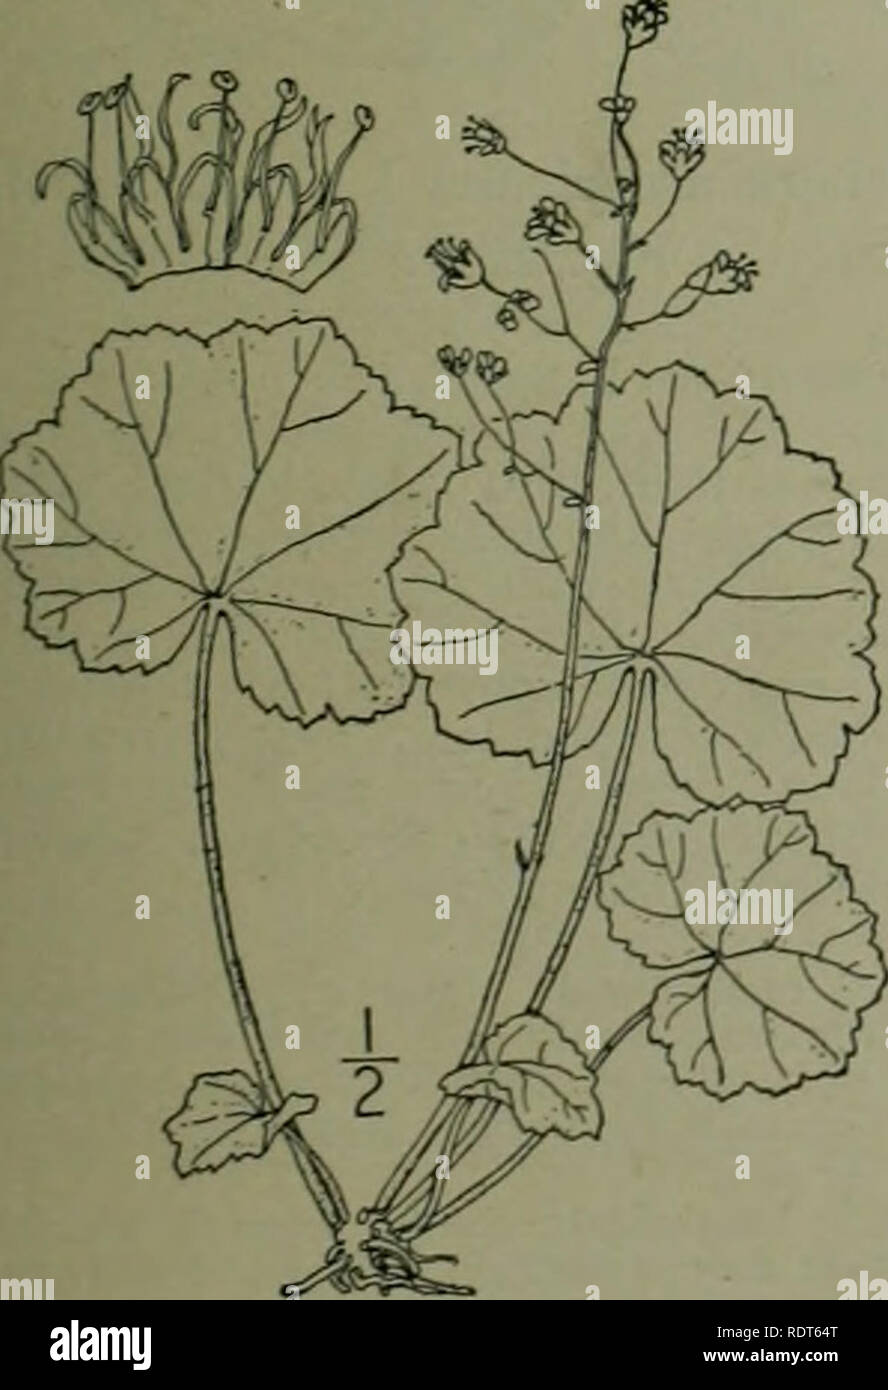 . An illustrated flora of the northern United States, Canada and the British possessions : from Newfoundland to the parallel of the southern boundary of Virginia and from the Atlantic Ocean westward to the 102nd meridian. Botany. Genus SAXIFRAGE FAMILY. throat of the calyx. Stamens g, inserted with the petals. Ovary i-celled; styles 2, slender. Ovules ^. Capsule 2-valved, 2-beaked. Seeds minutely hispid or muricate. [Named for Johann Heinrich von Heuchcr, 1677-1747, a German botanist.] About 70 species, natives of North America and Mexico. Type species: Heuchera americana L. Flowers regular or Stock Photo